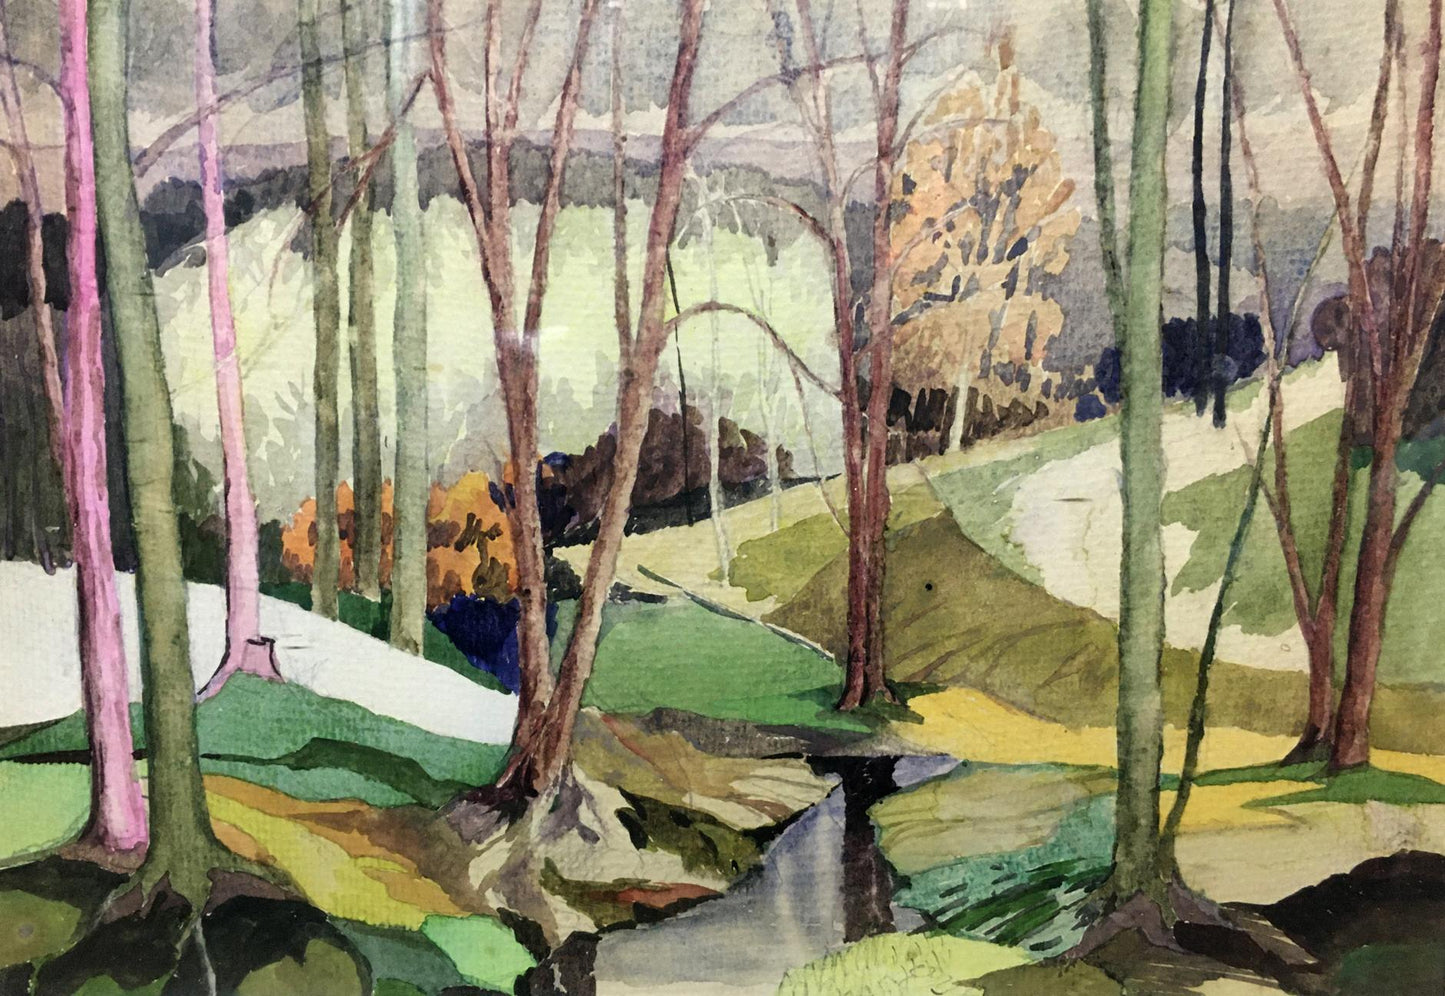 V. Olisevich's watercolor captures a serene forest stream